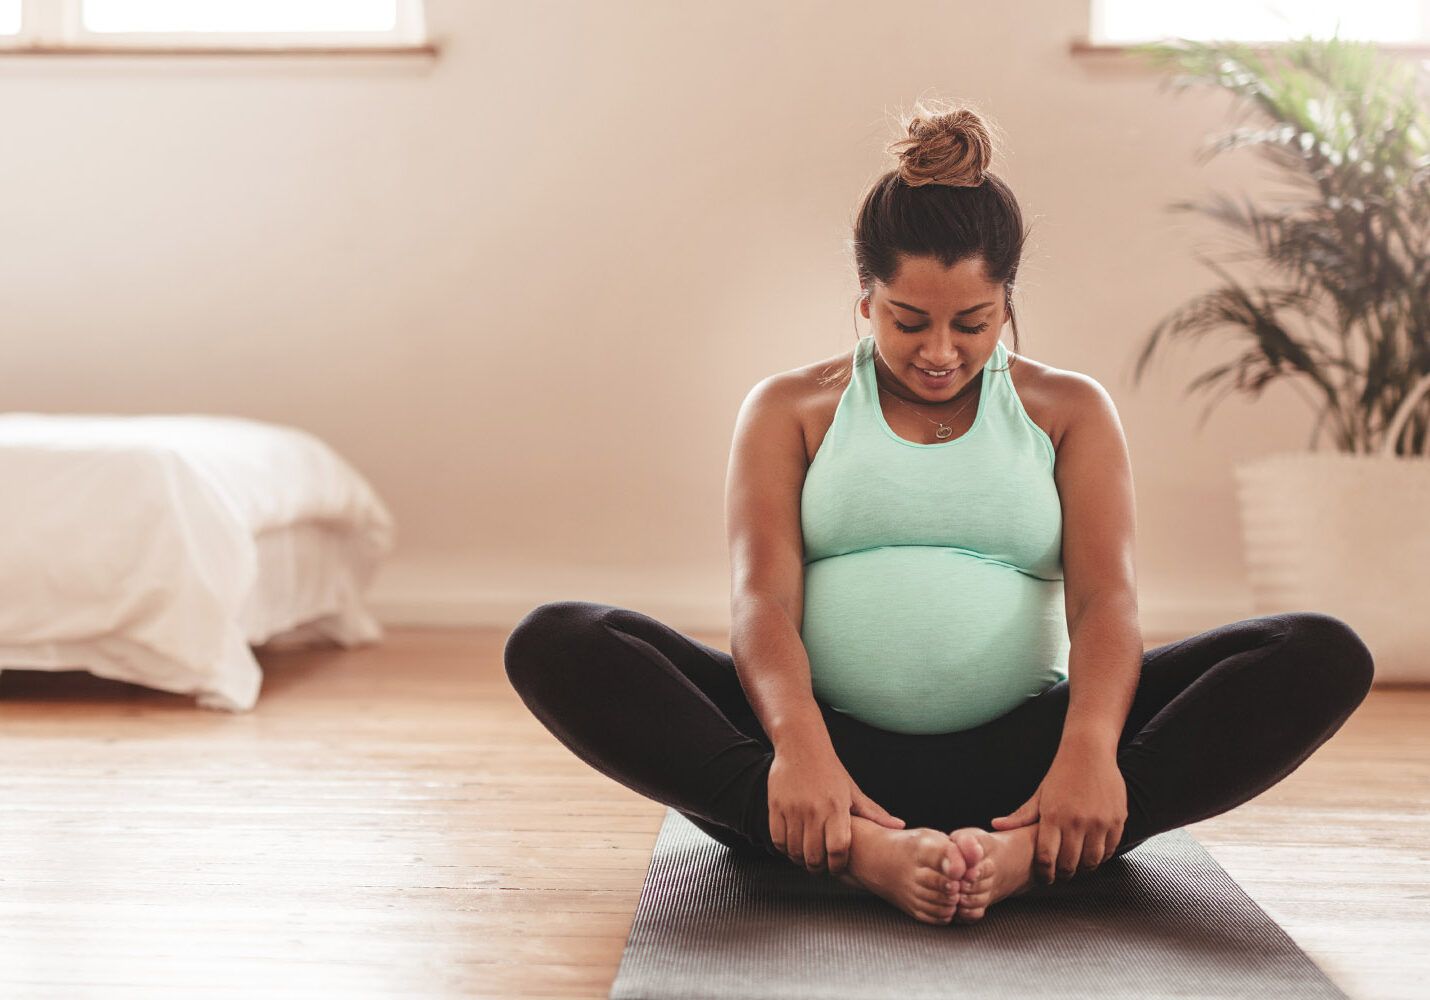 pregnant woman in a mint green tank and black leggings sits on a hardwood floor in butterfly pose